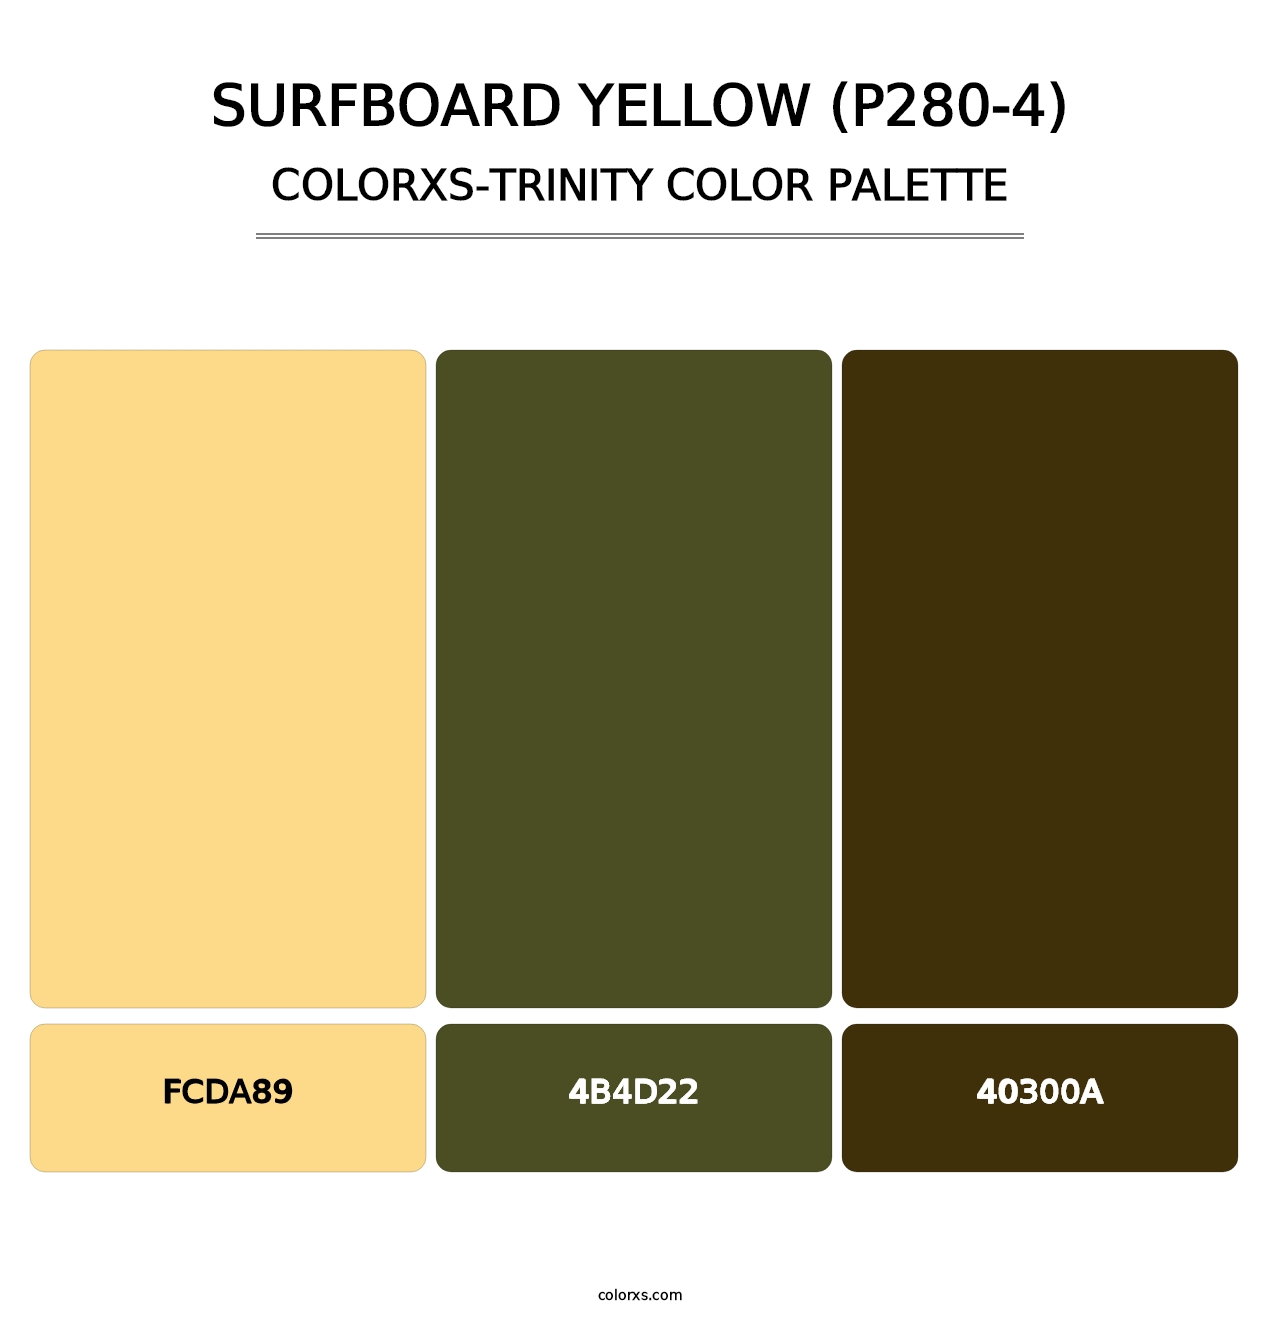 Surfboard Yellow (P280-4) - Colorxs Trinity Palette